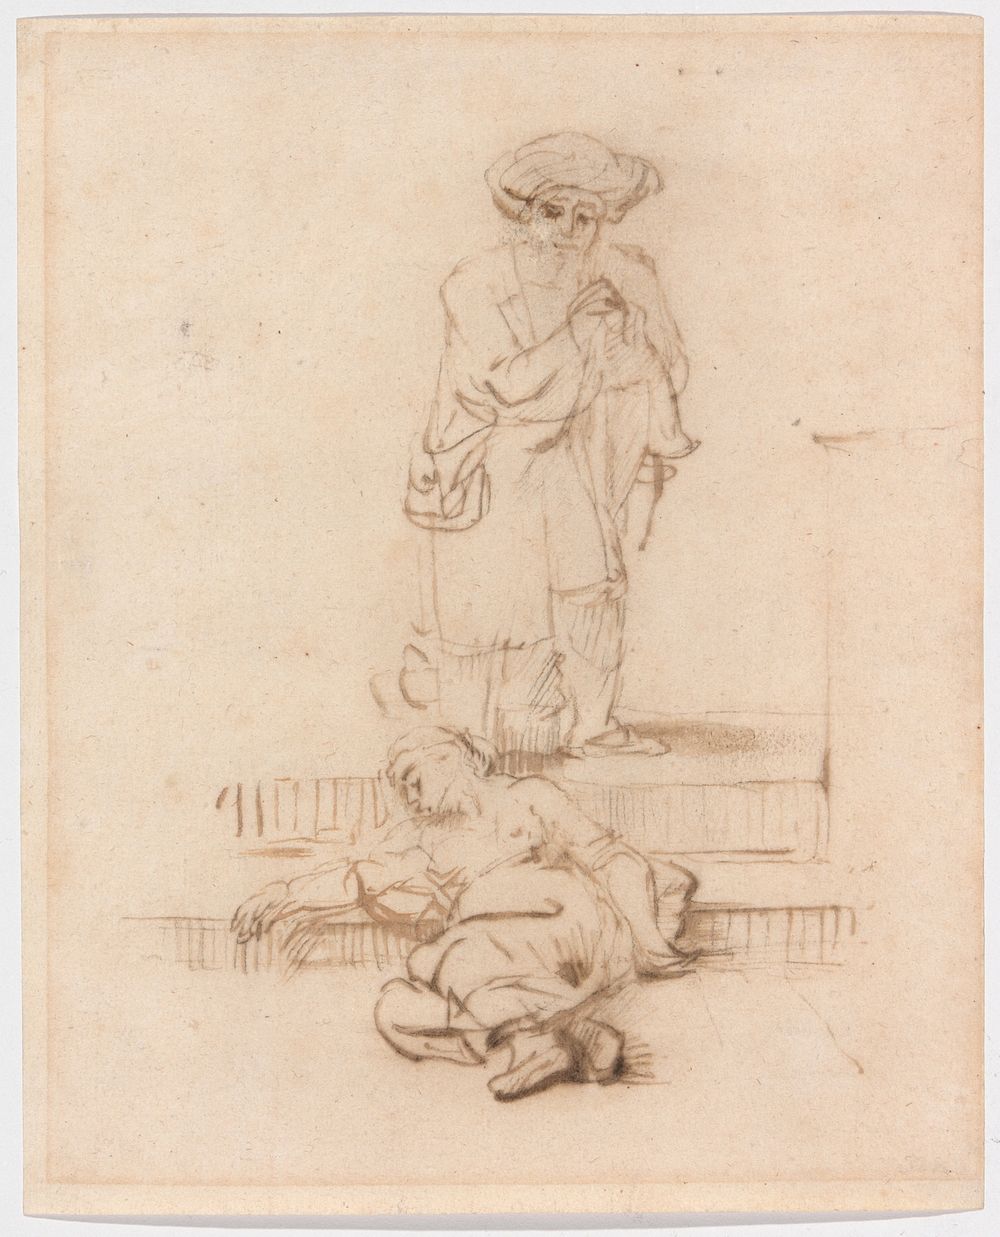 Copy after the Levite and the Violated Woman by Follower of Rembrandt van Rijn